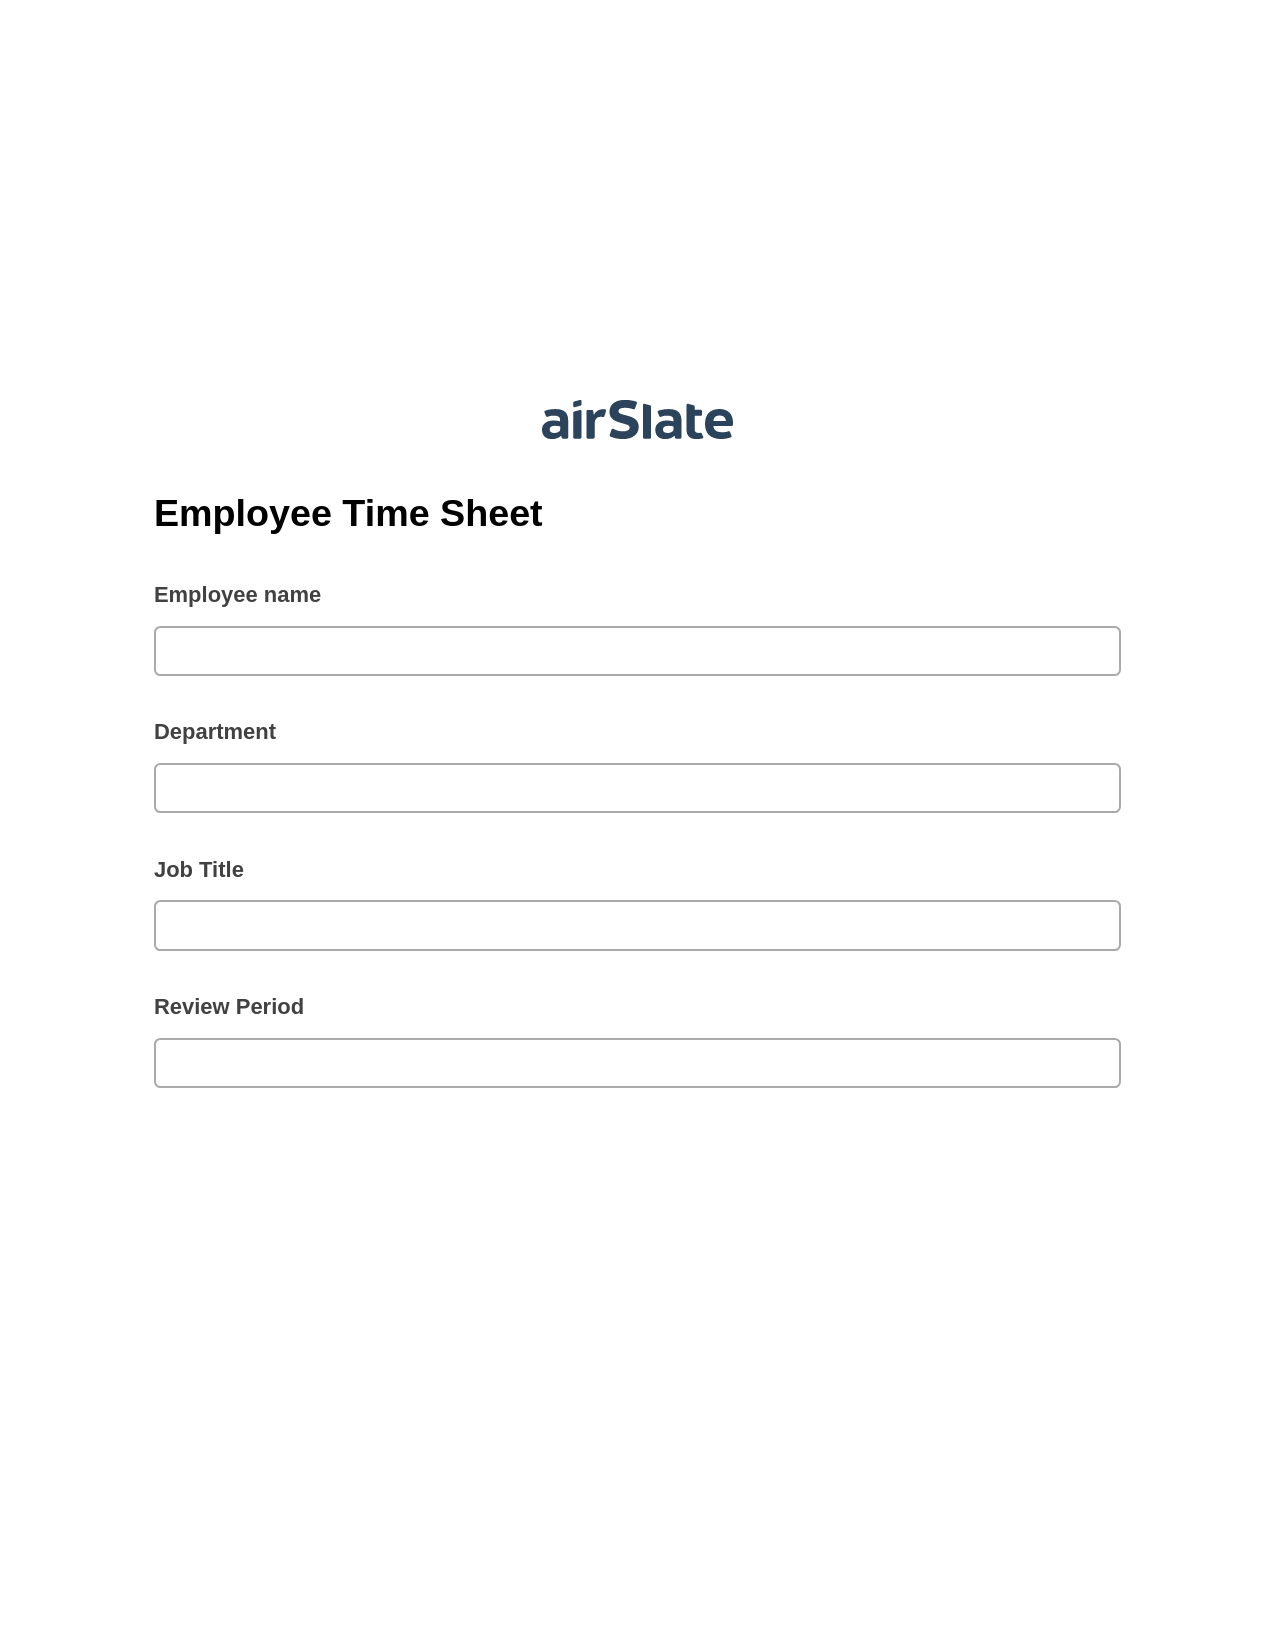 Employee Time Sheet Prefill from NetSuite records, Update Audit Trail Bot, Export to NetSuite Bot